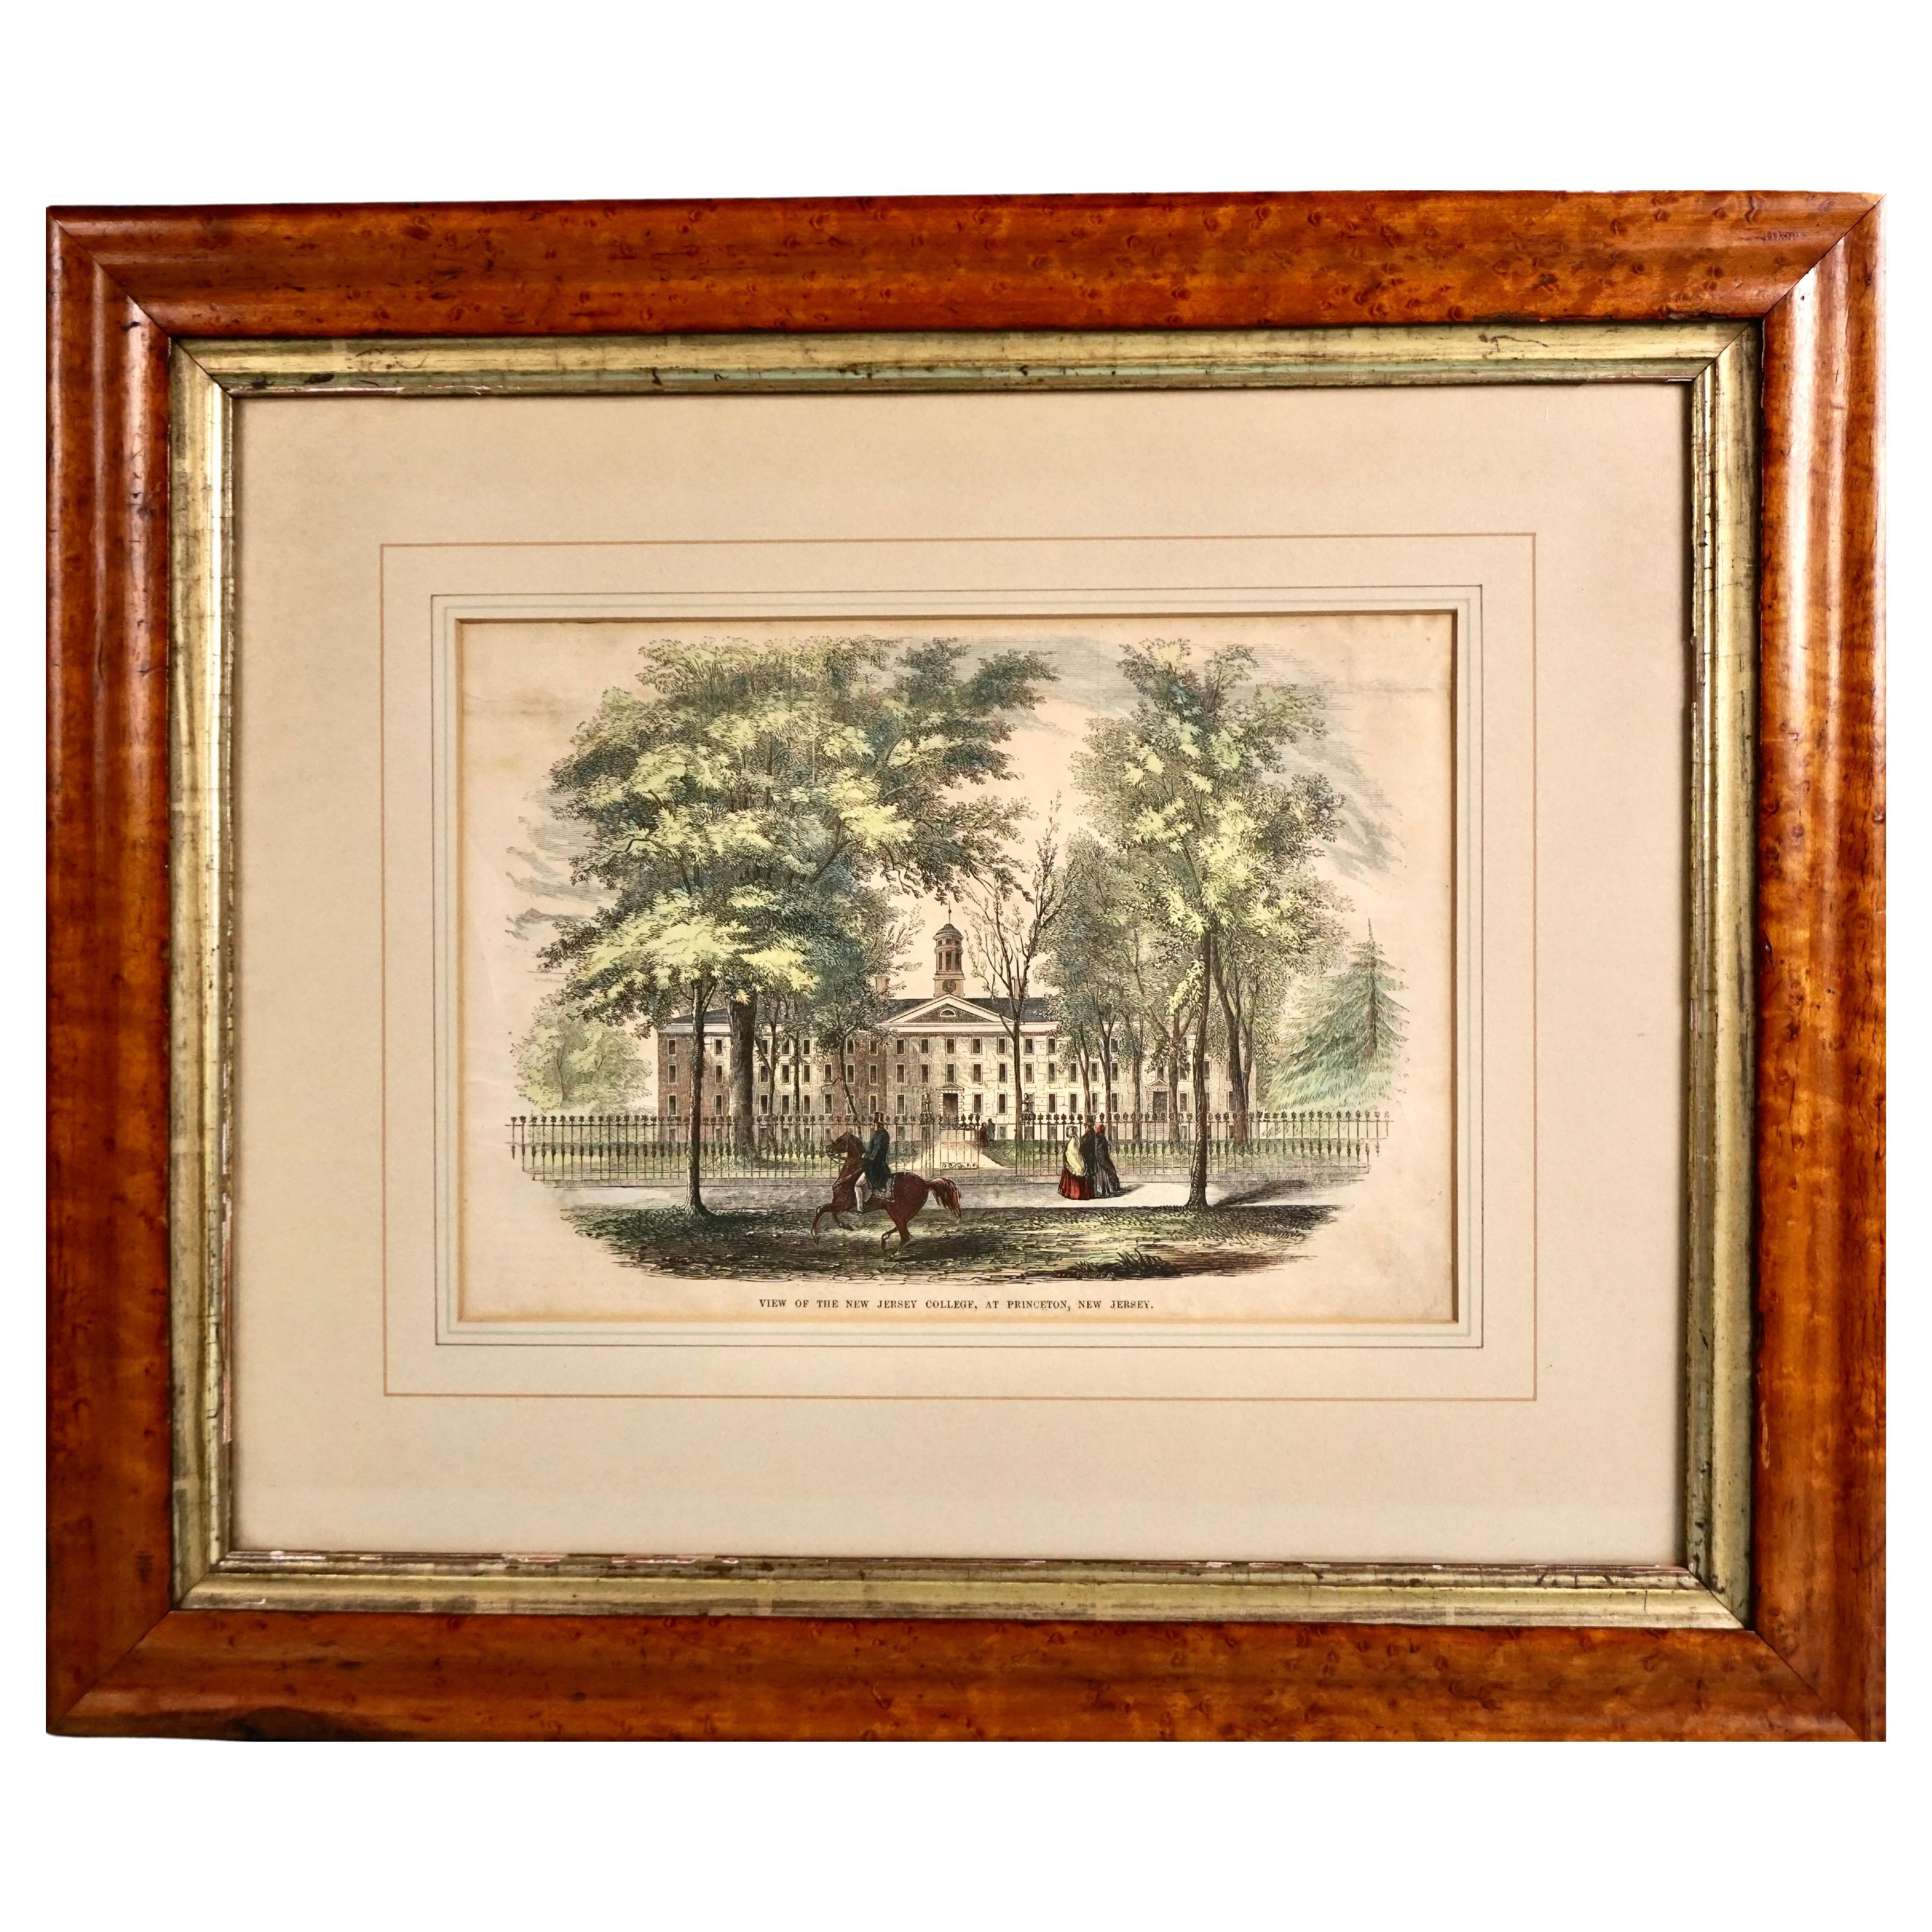 Hand Colored Wood Engraving of Princeton University in Period Maple Frame